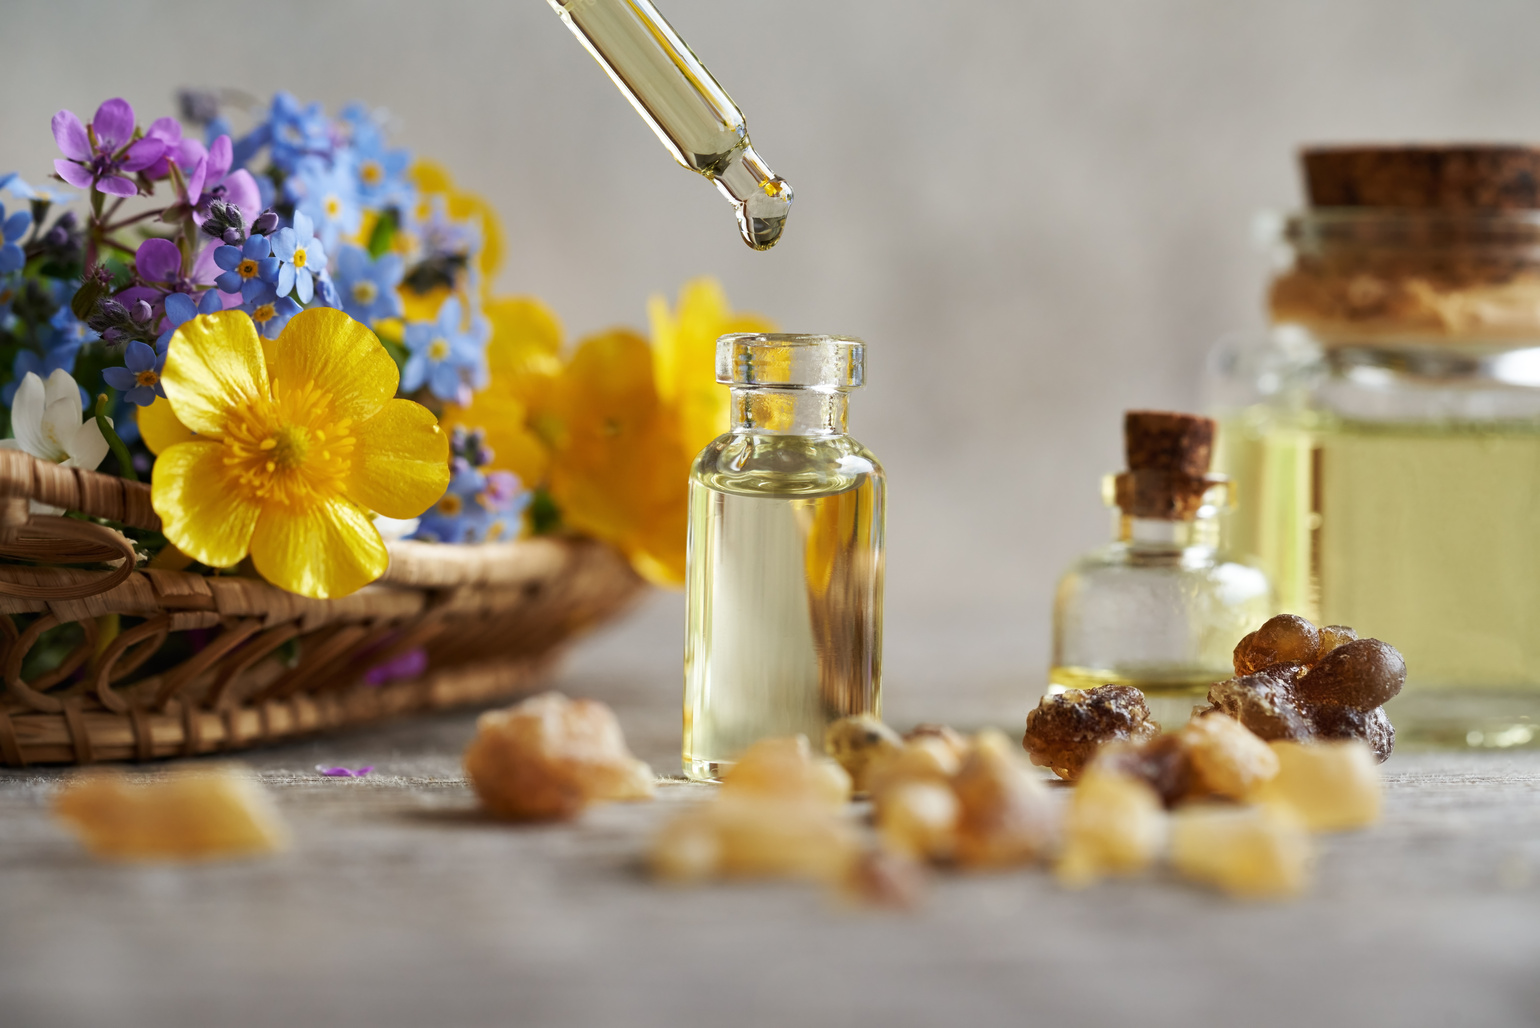 Dropping essential oil into a bottle, with frankincense and colorful flowers